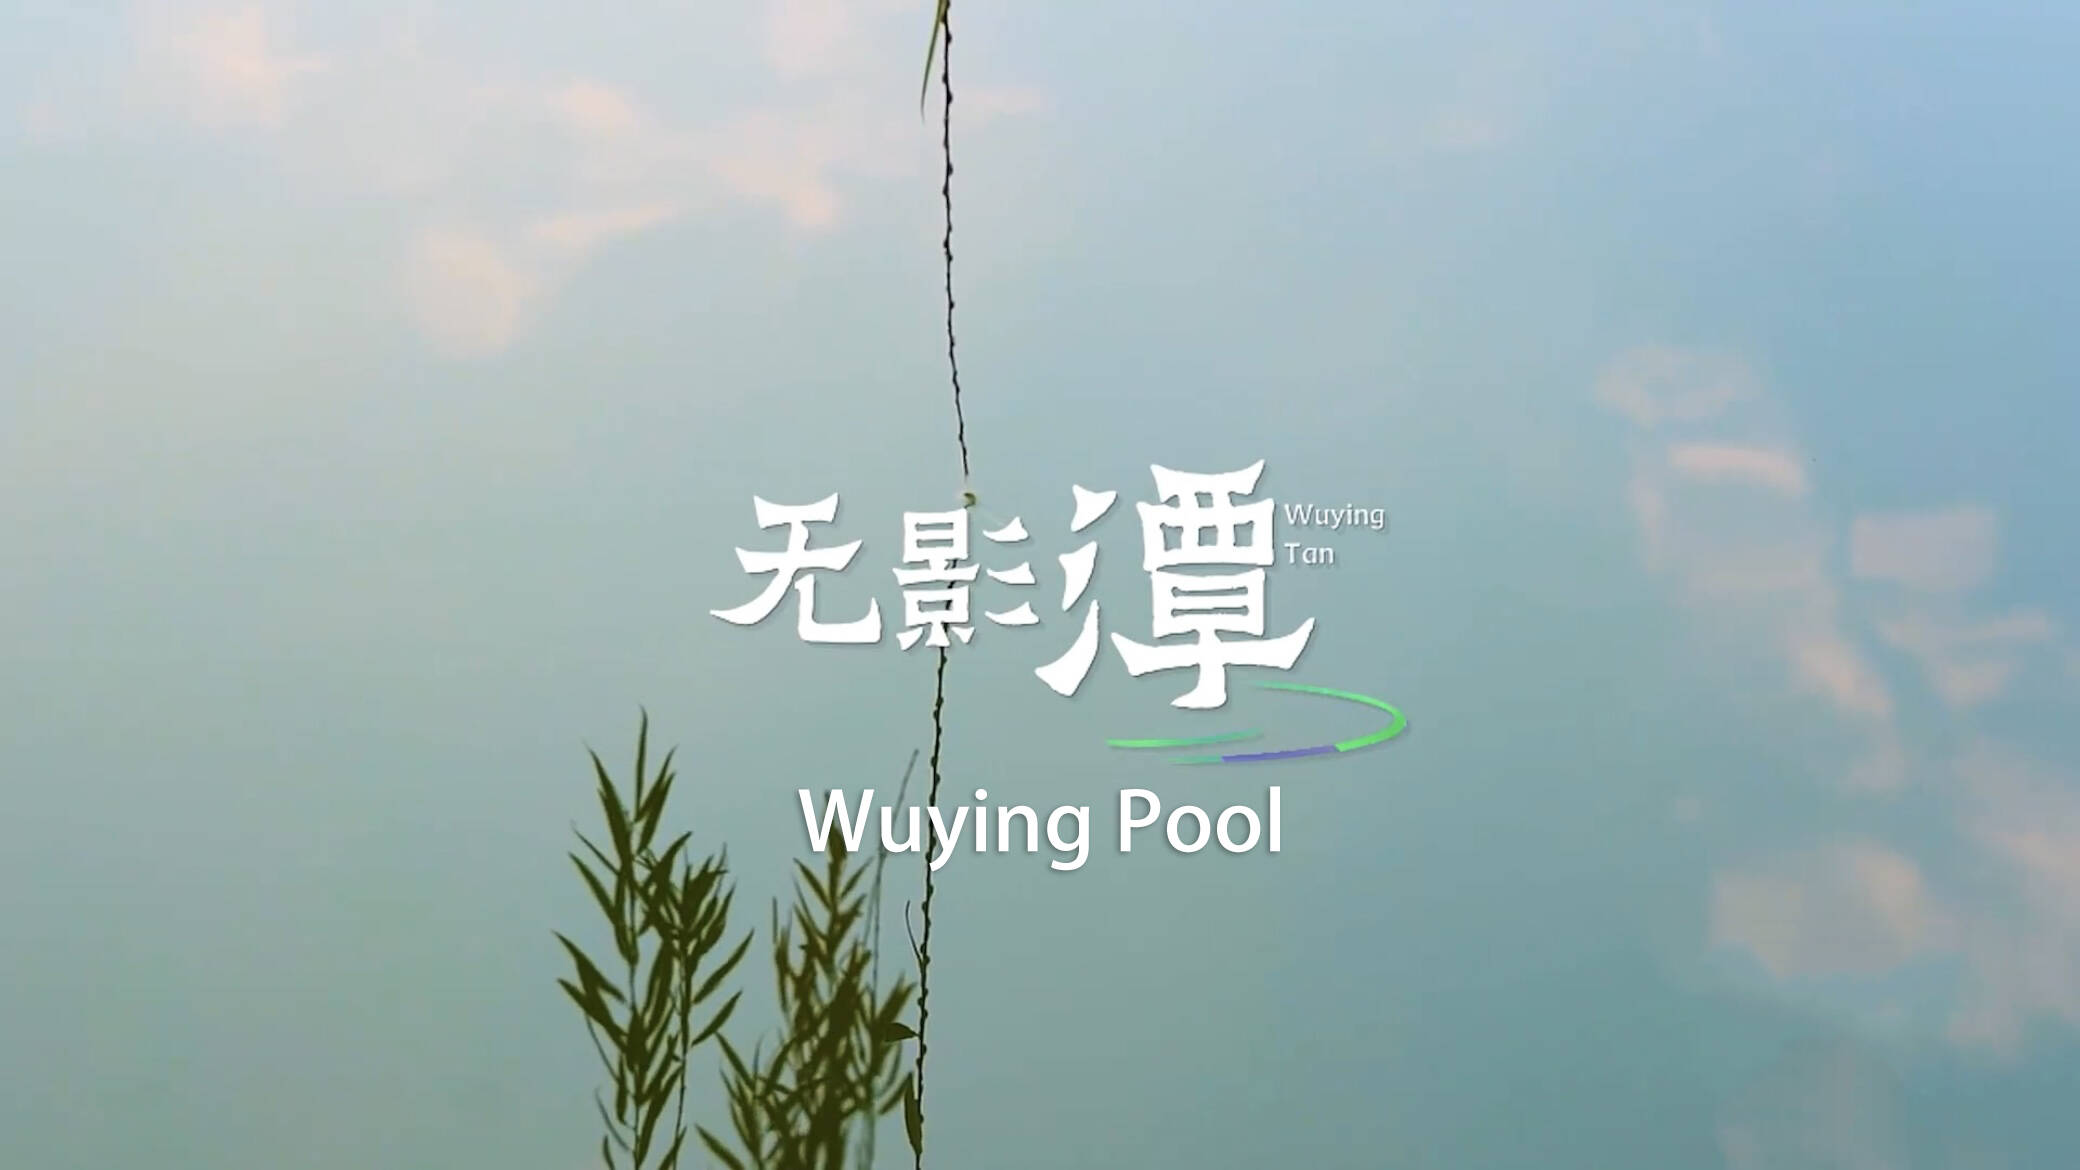 SDICC Video | Poetic and Picturesque 72 Springs: Wuying Pool